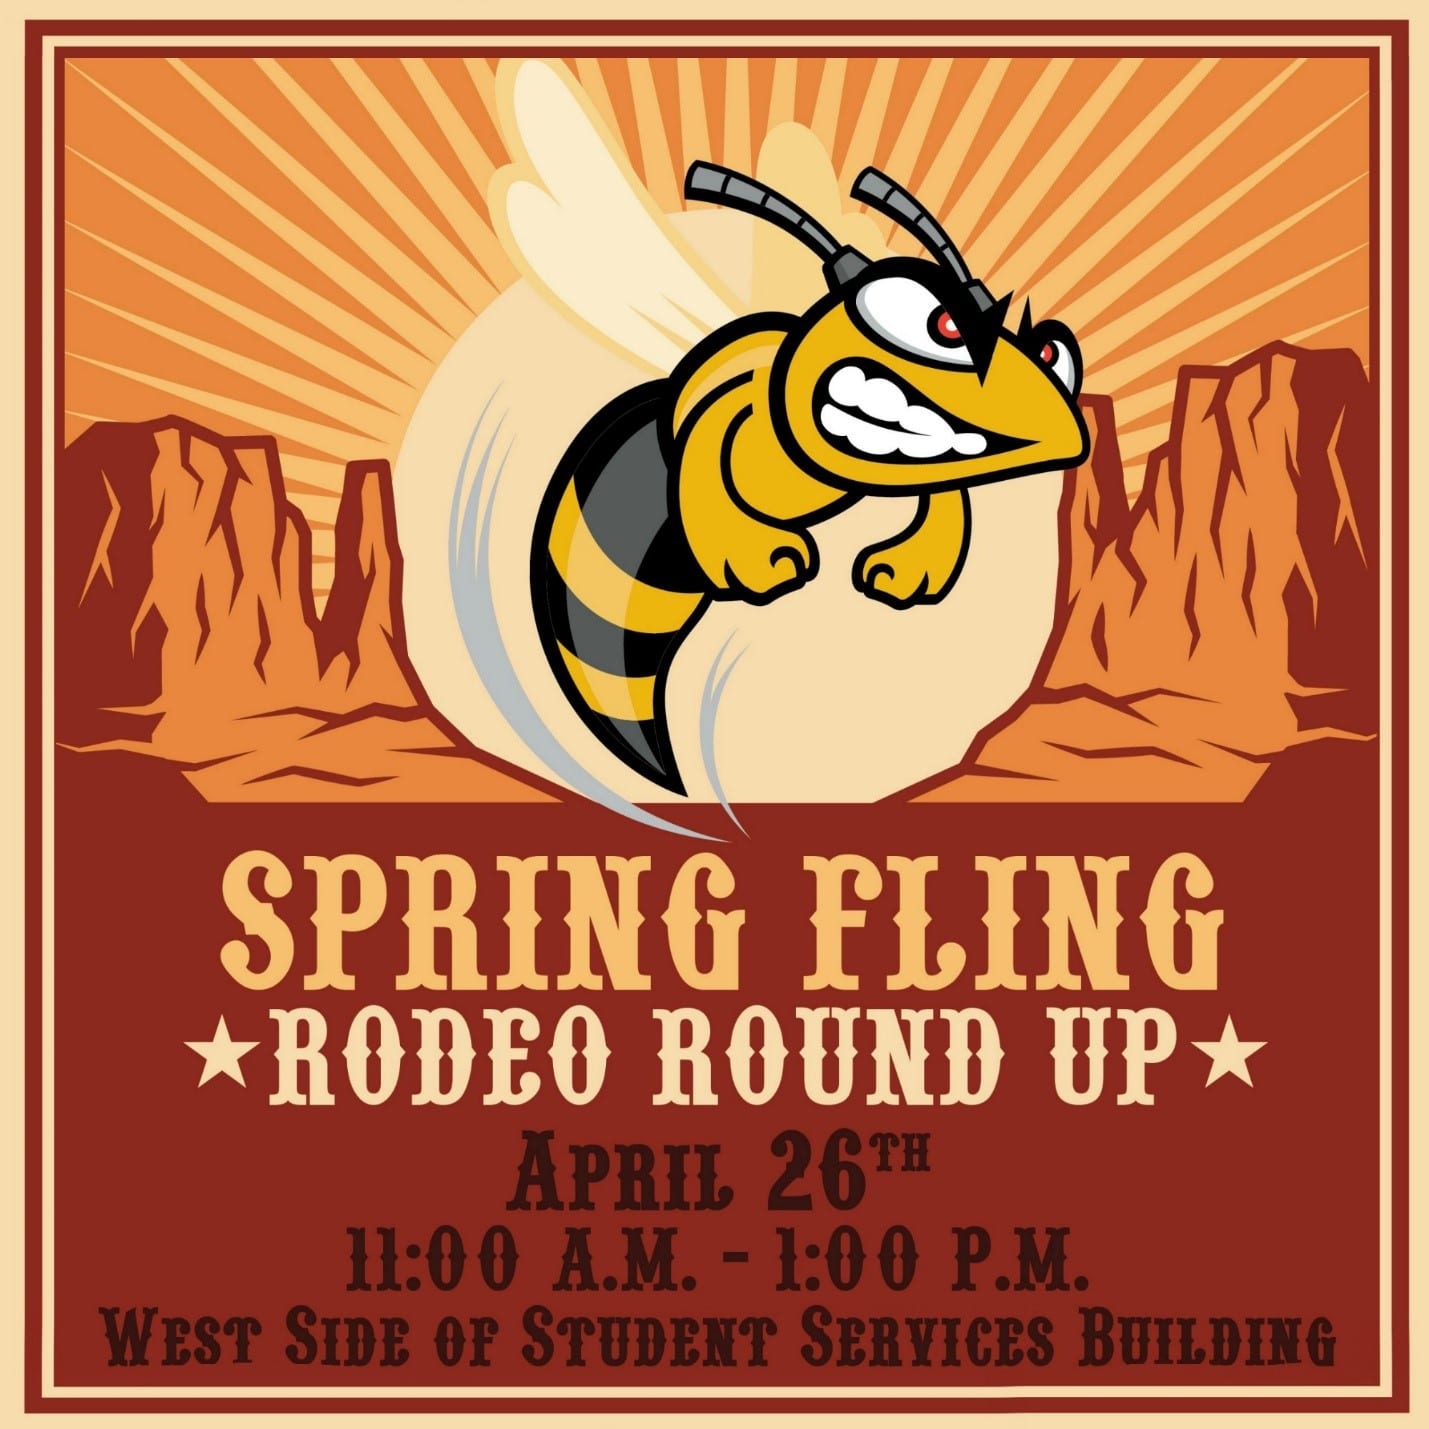 Spring Fling is almost here! Clubs, schedule your tables.